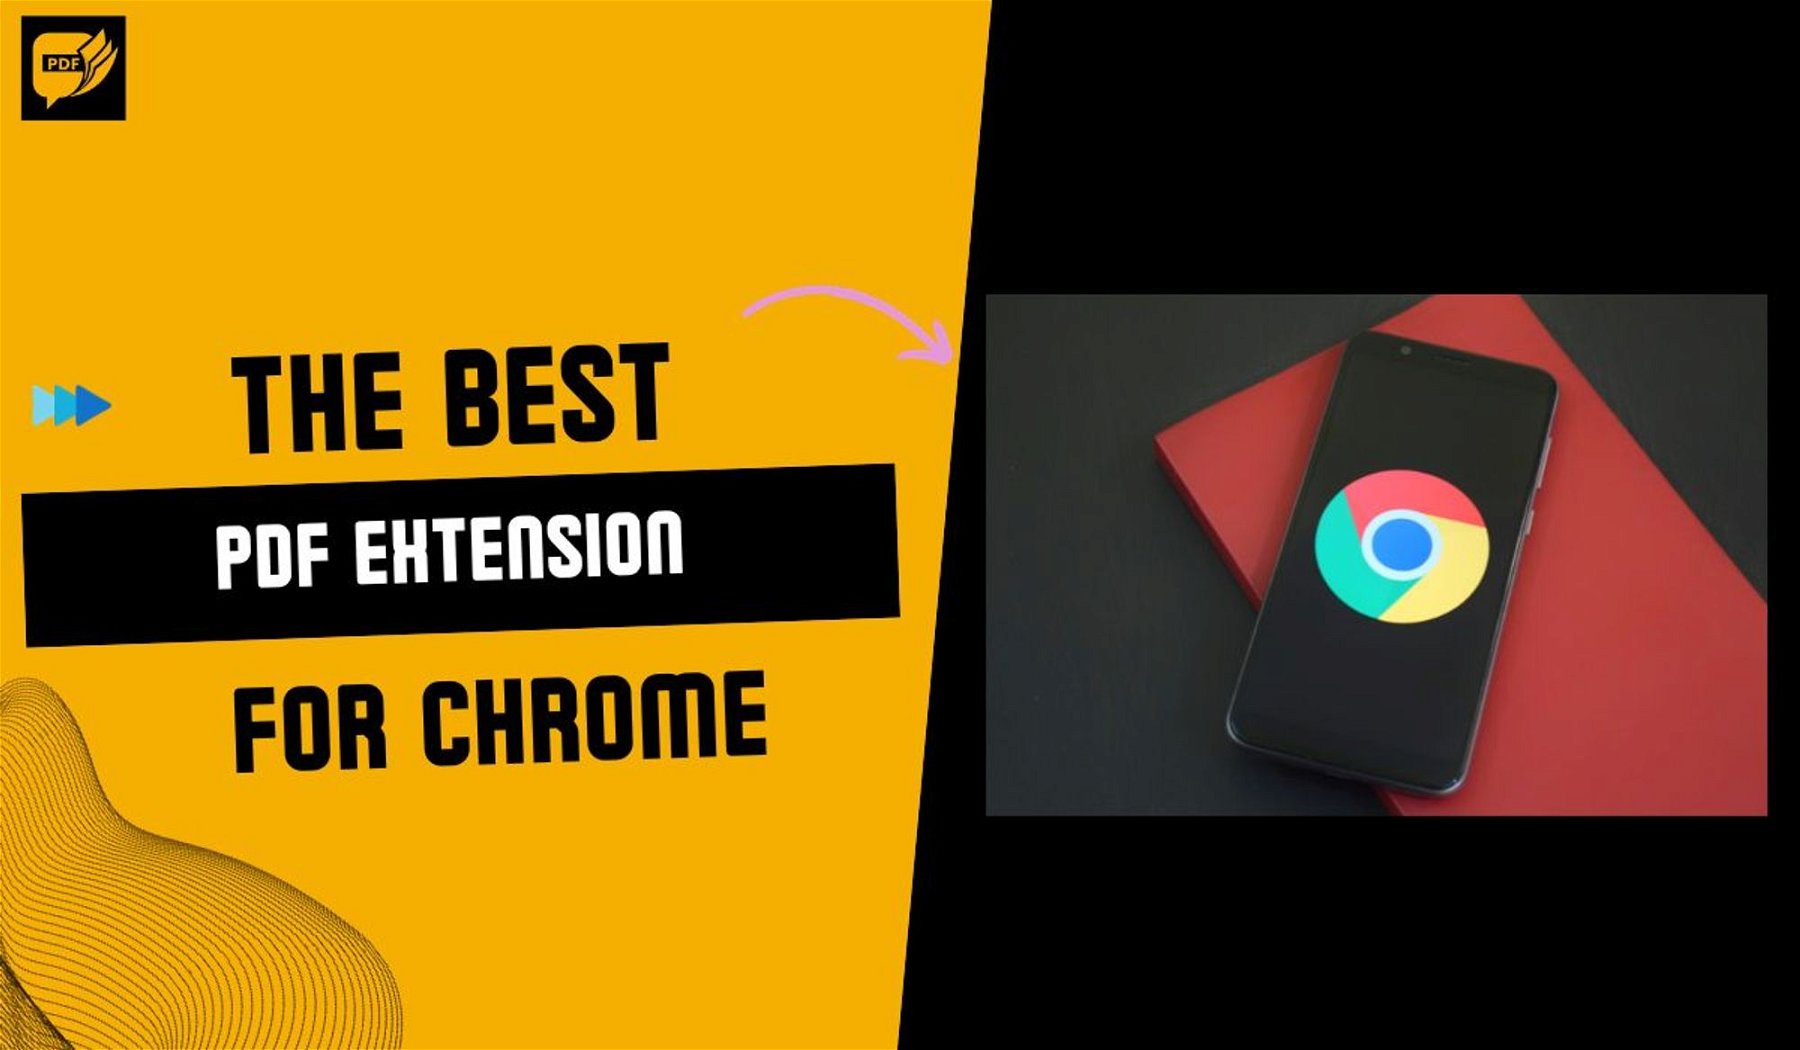 The Best PDF Extension for Chrome